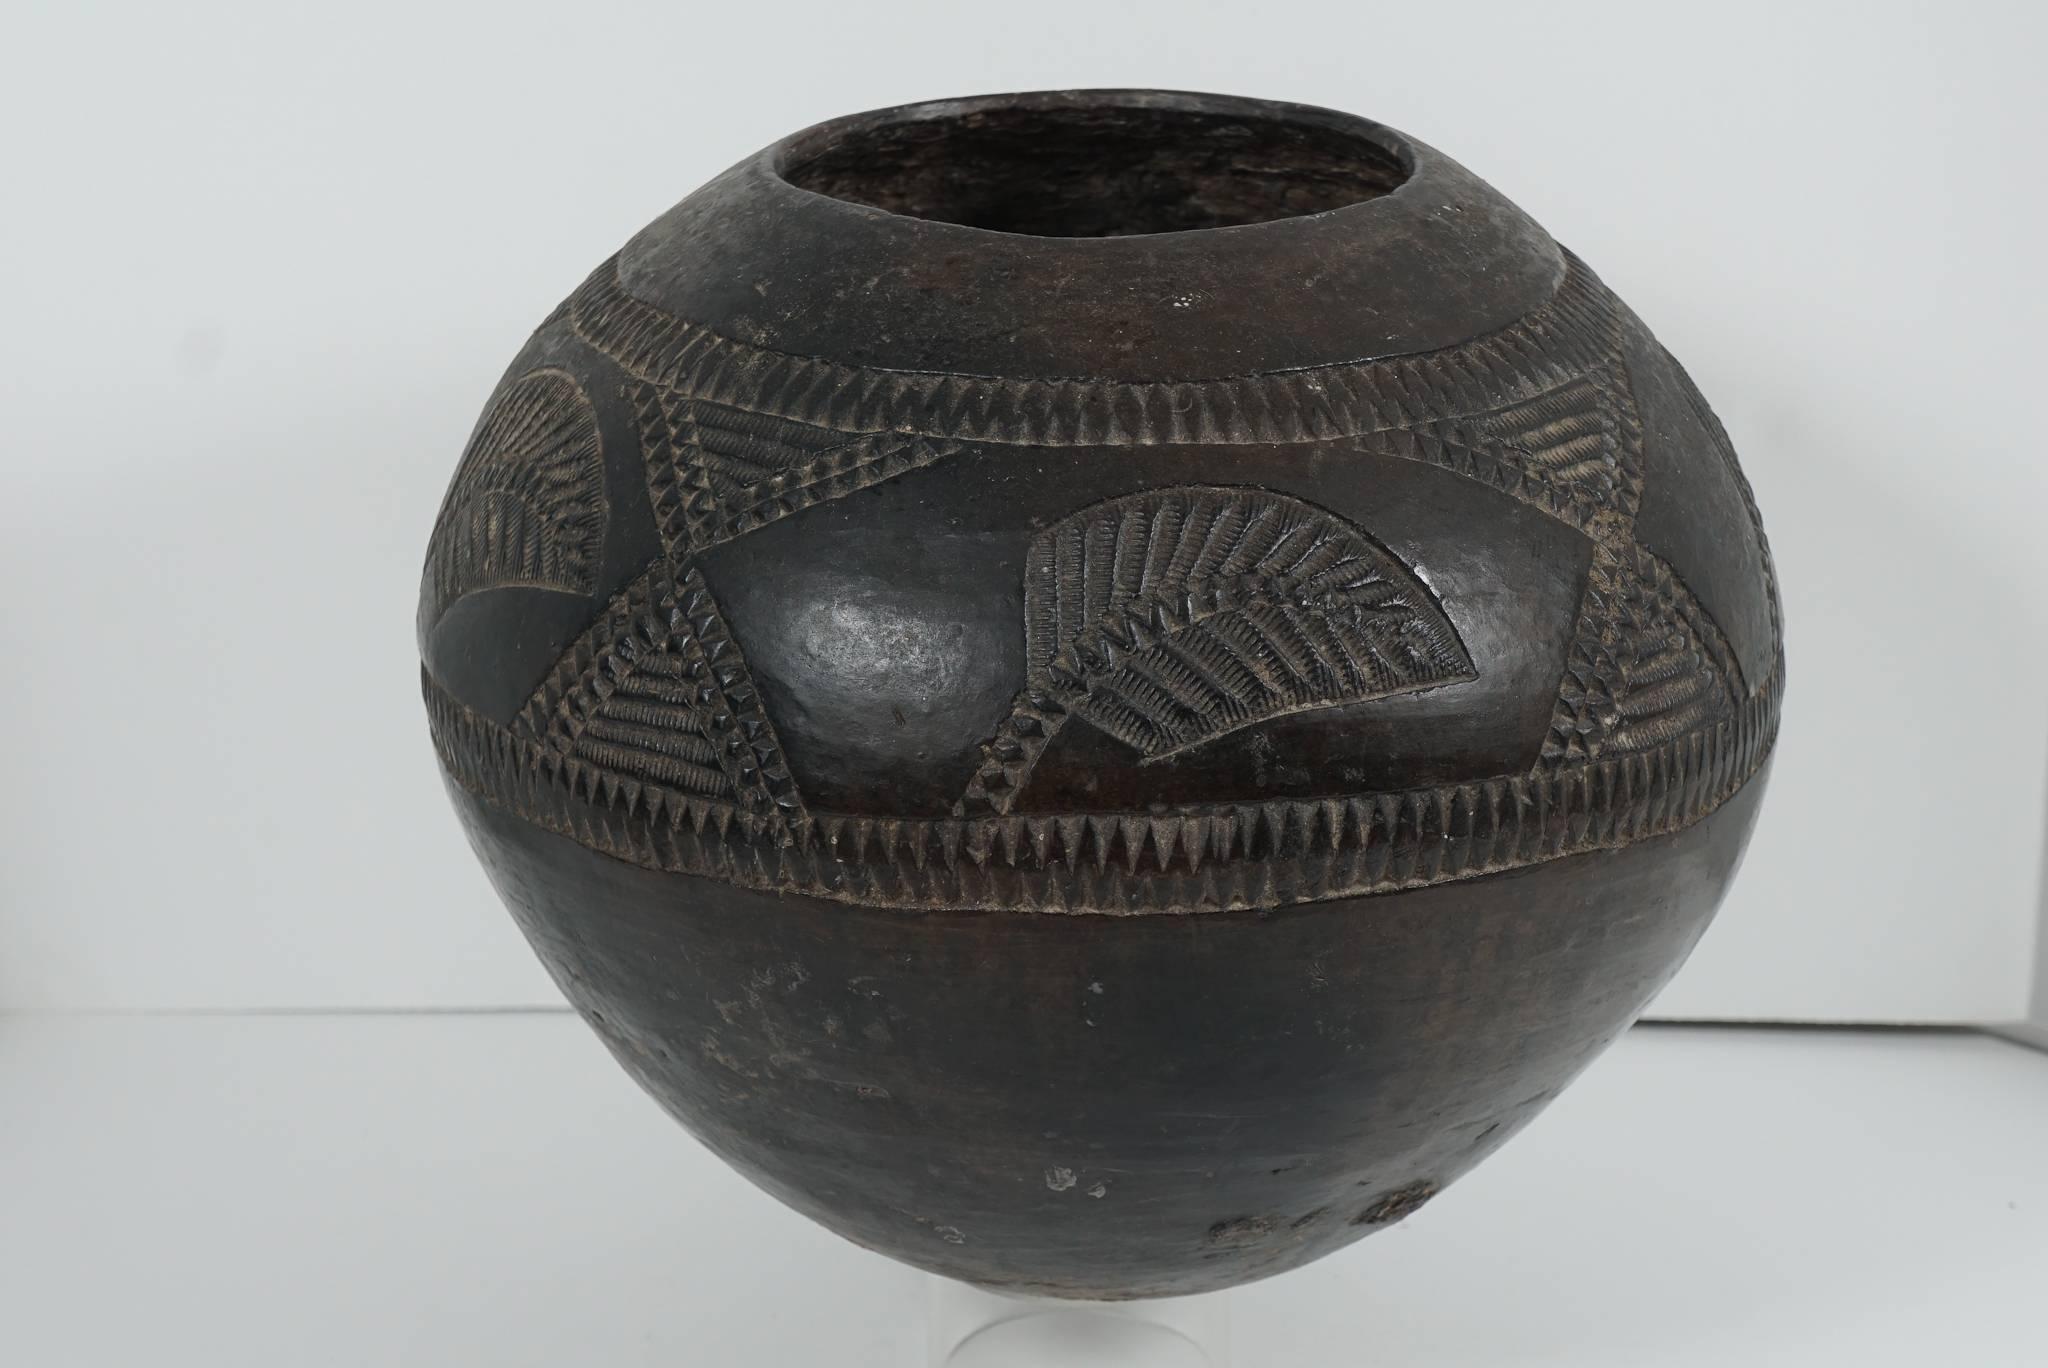 This Ukhamba or beer pot comes from Melmoth South Africa and was made by a member of the Mkhandlwini clan specifically the Masuku family set. Collected in the 1970s but dated to being clan made in the 1960s. Potted as a large enclosed bowl the